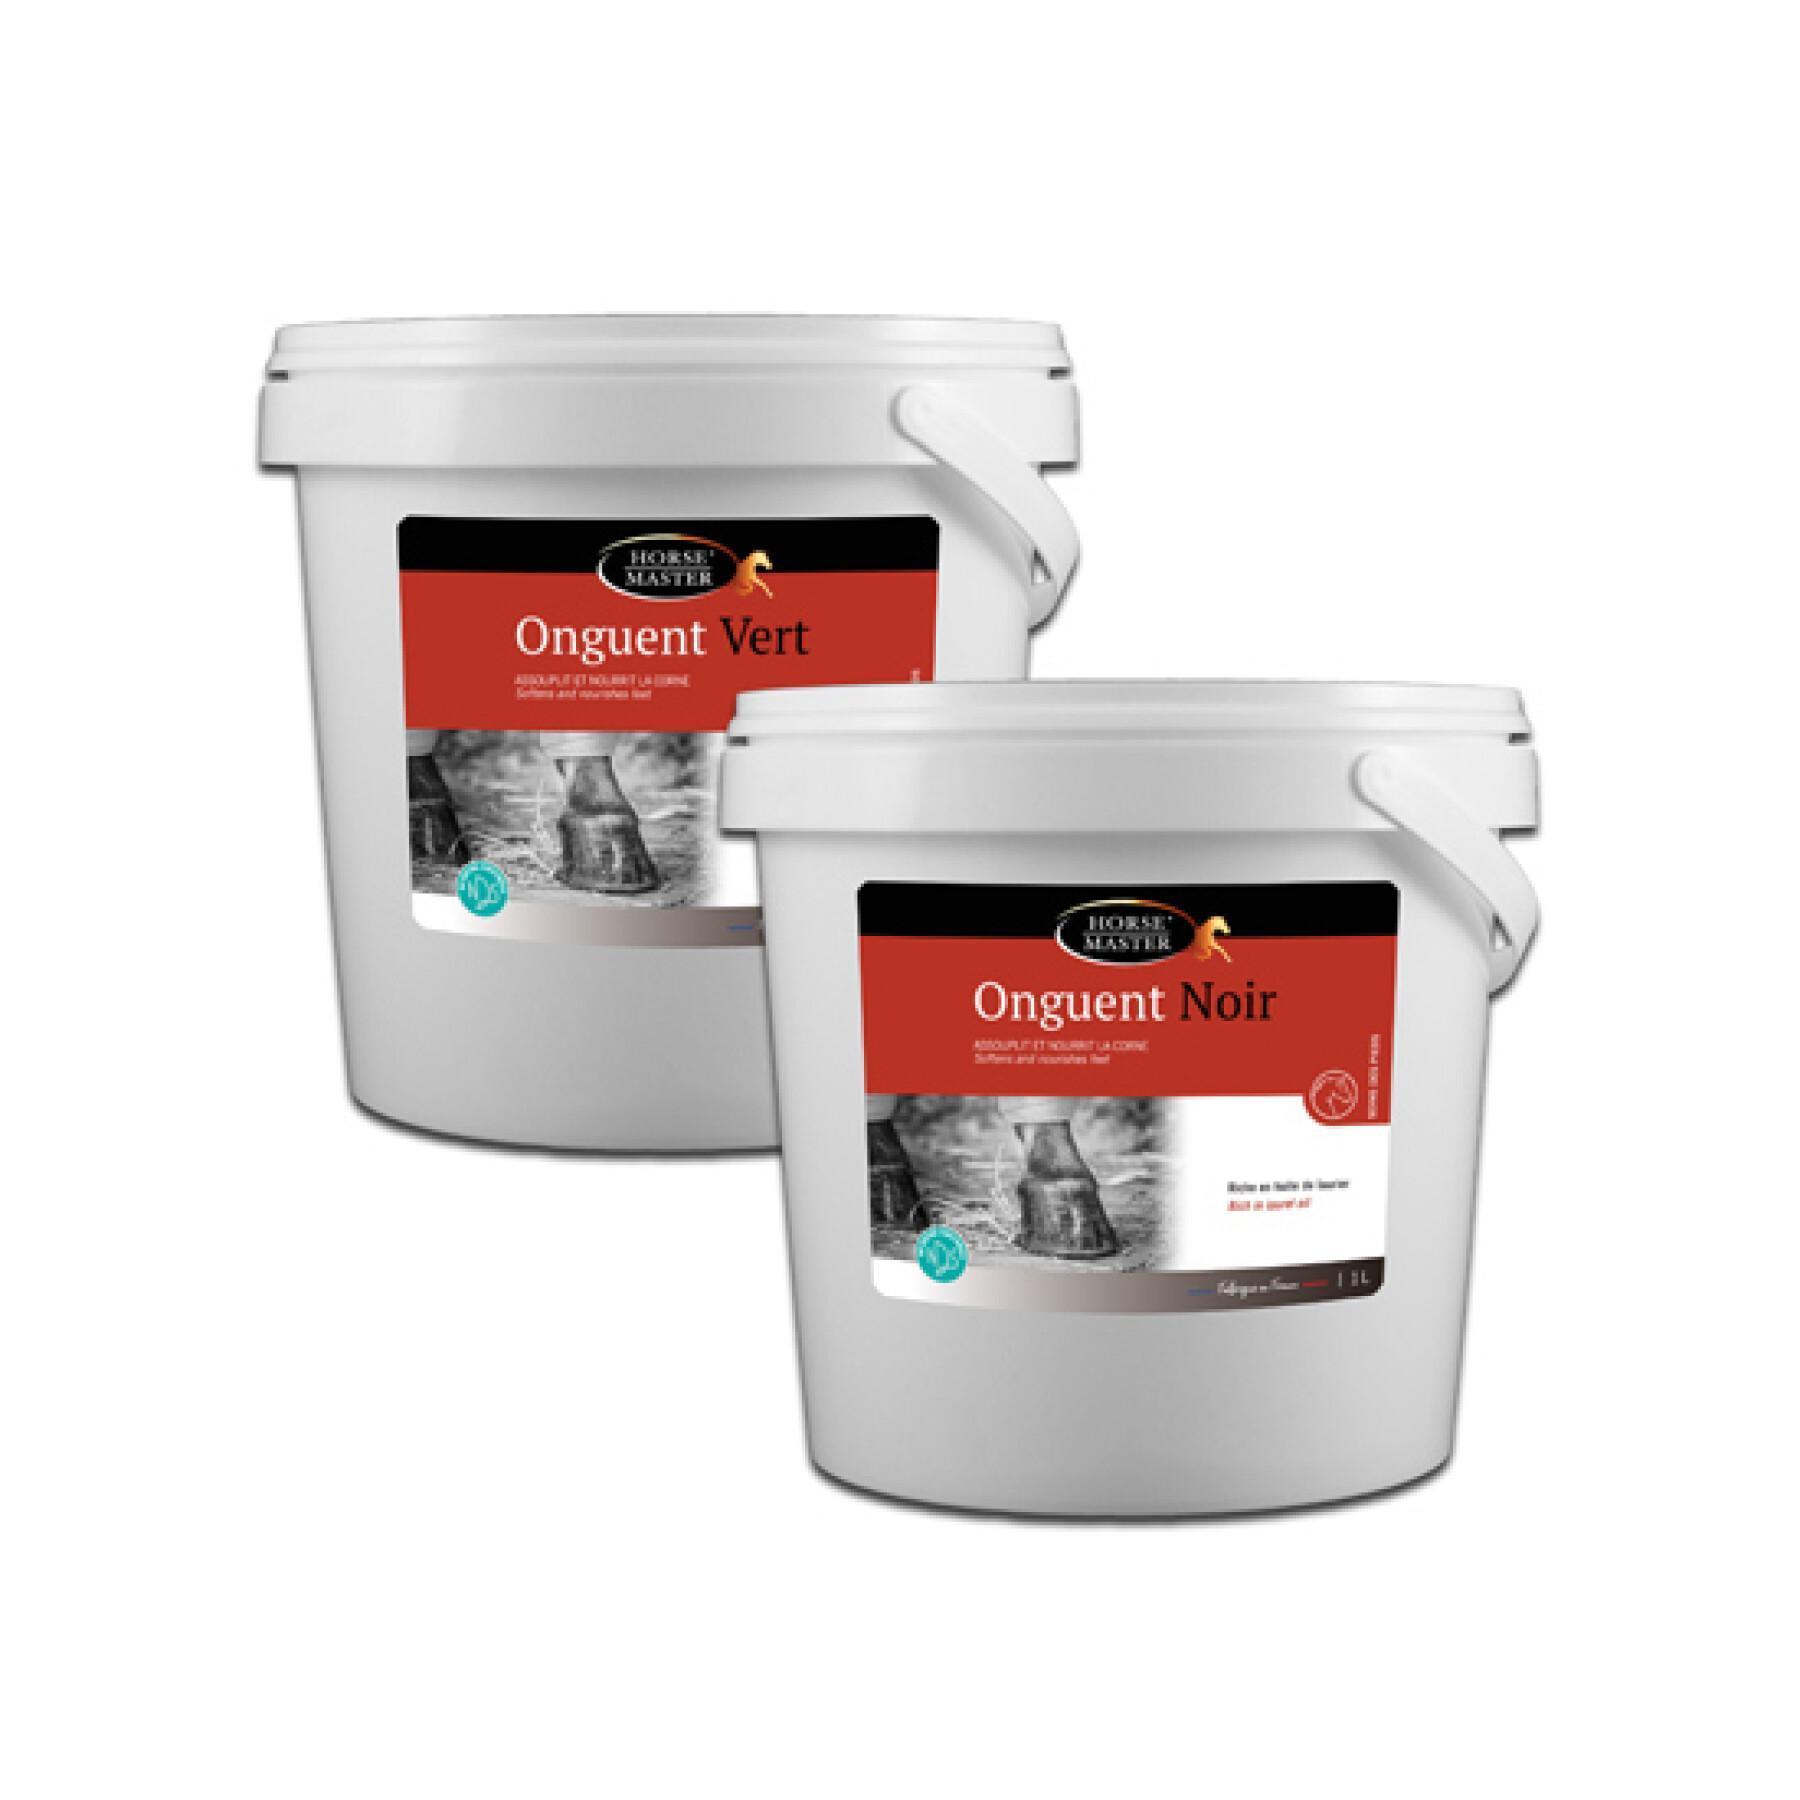 Oil for horse hoof nutrition with laurel Horse Master Onguent Vert 5 L